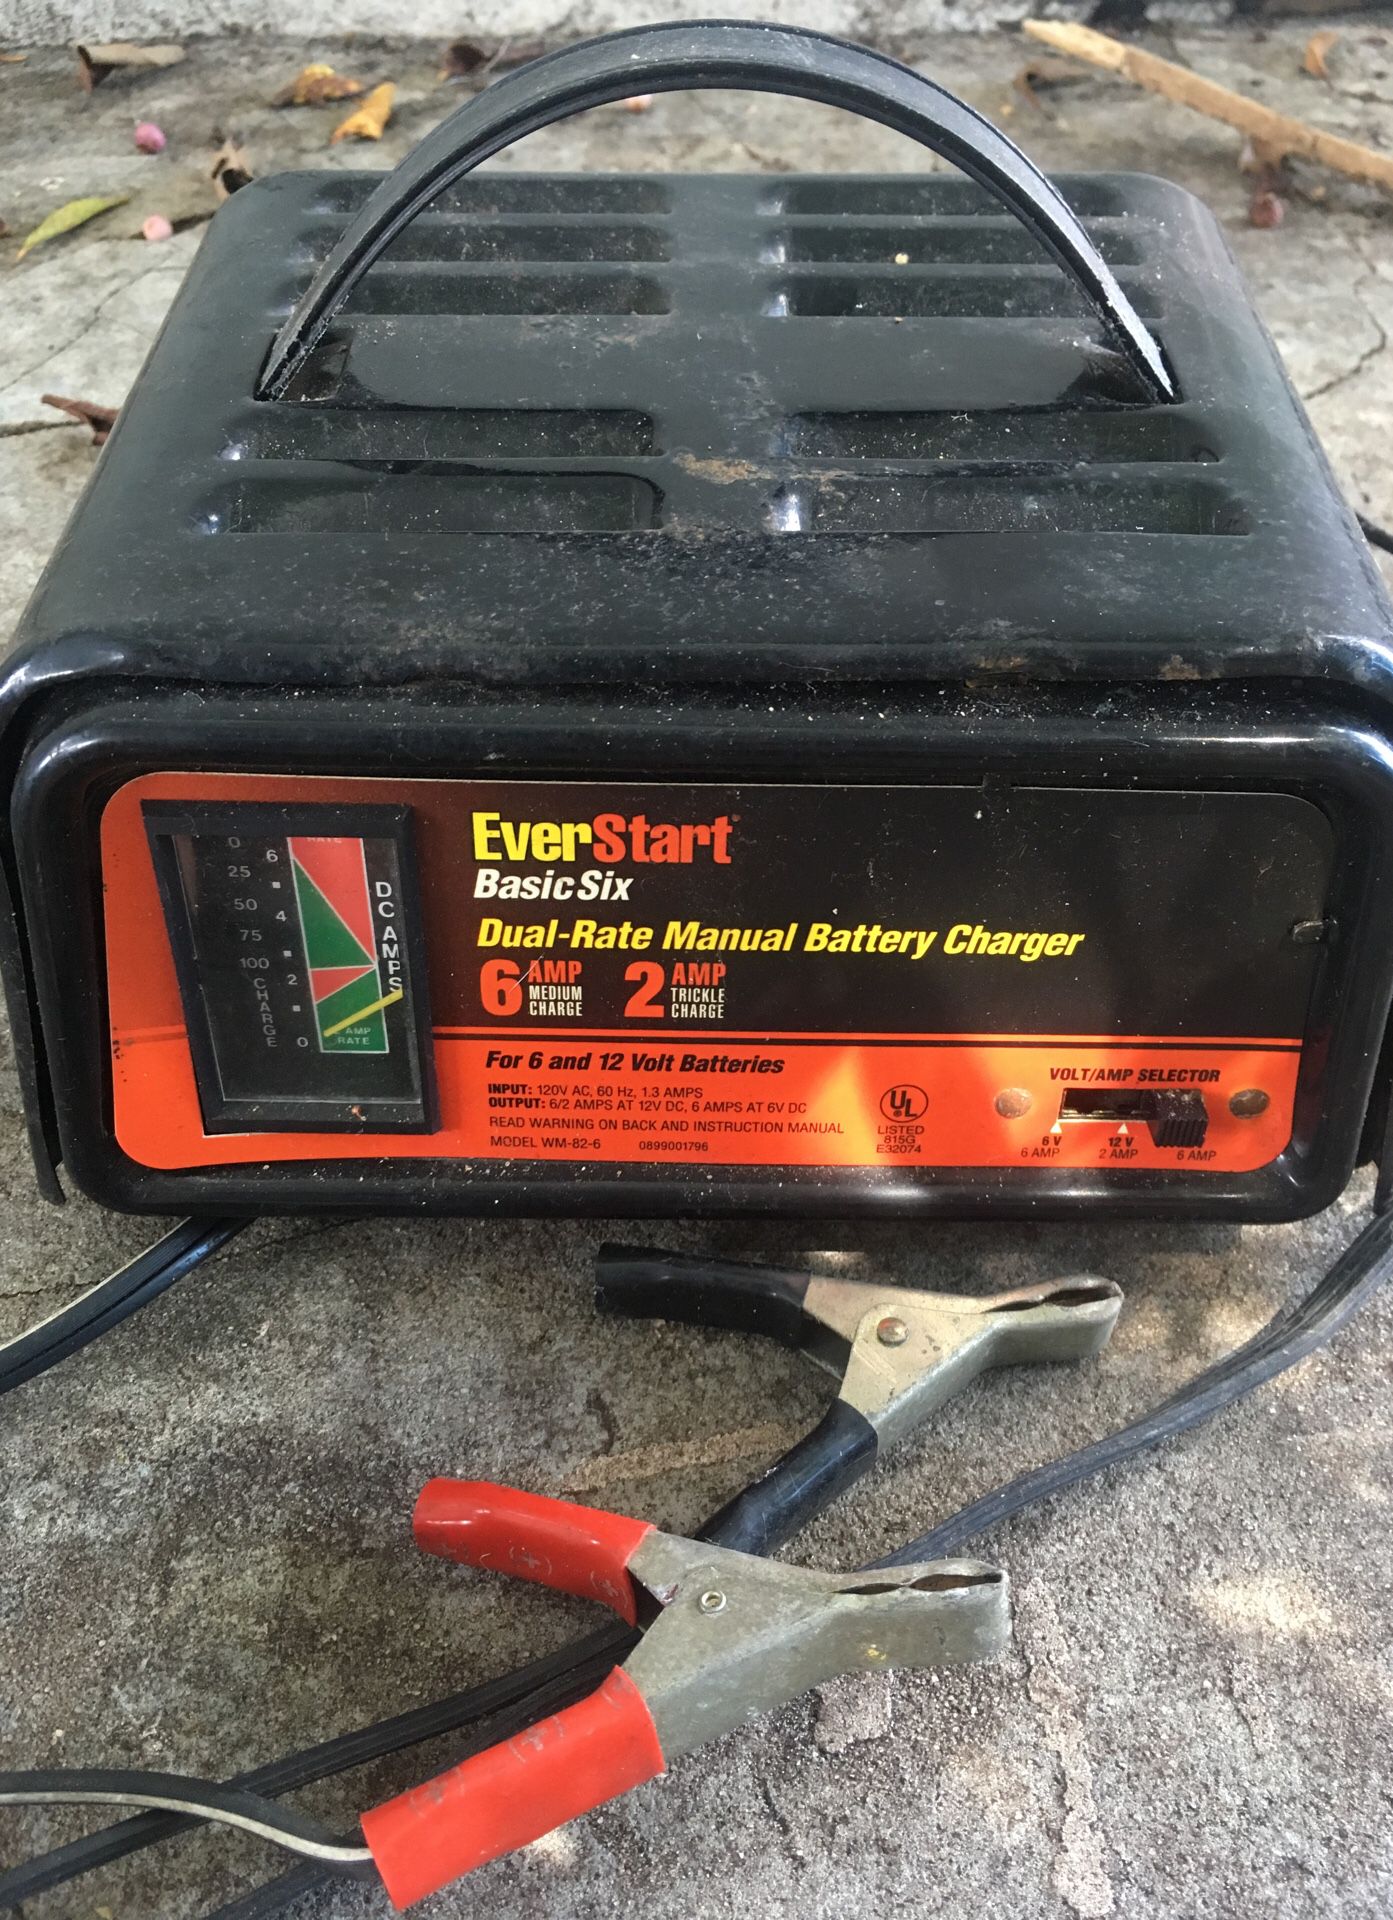 Ever start battery charger for Sale in Delray Beach, FL - OfferUp